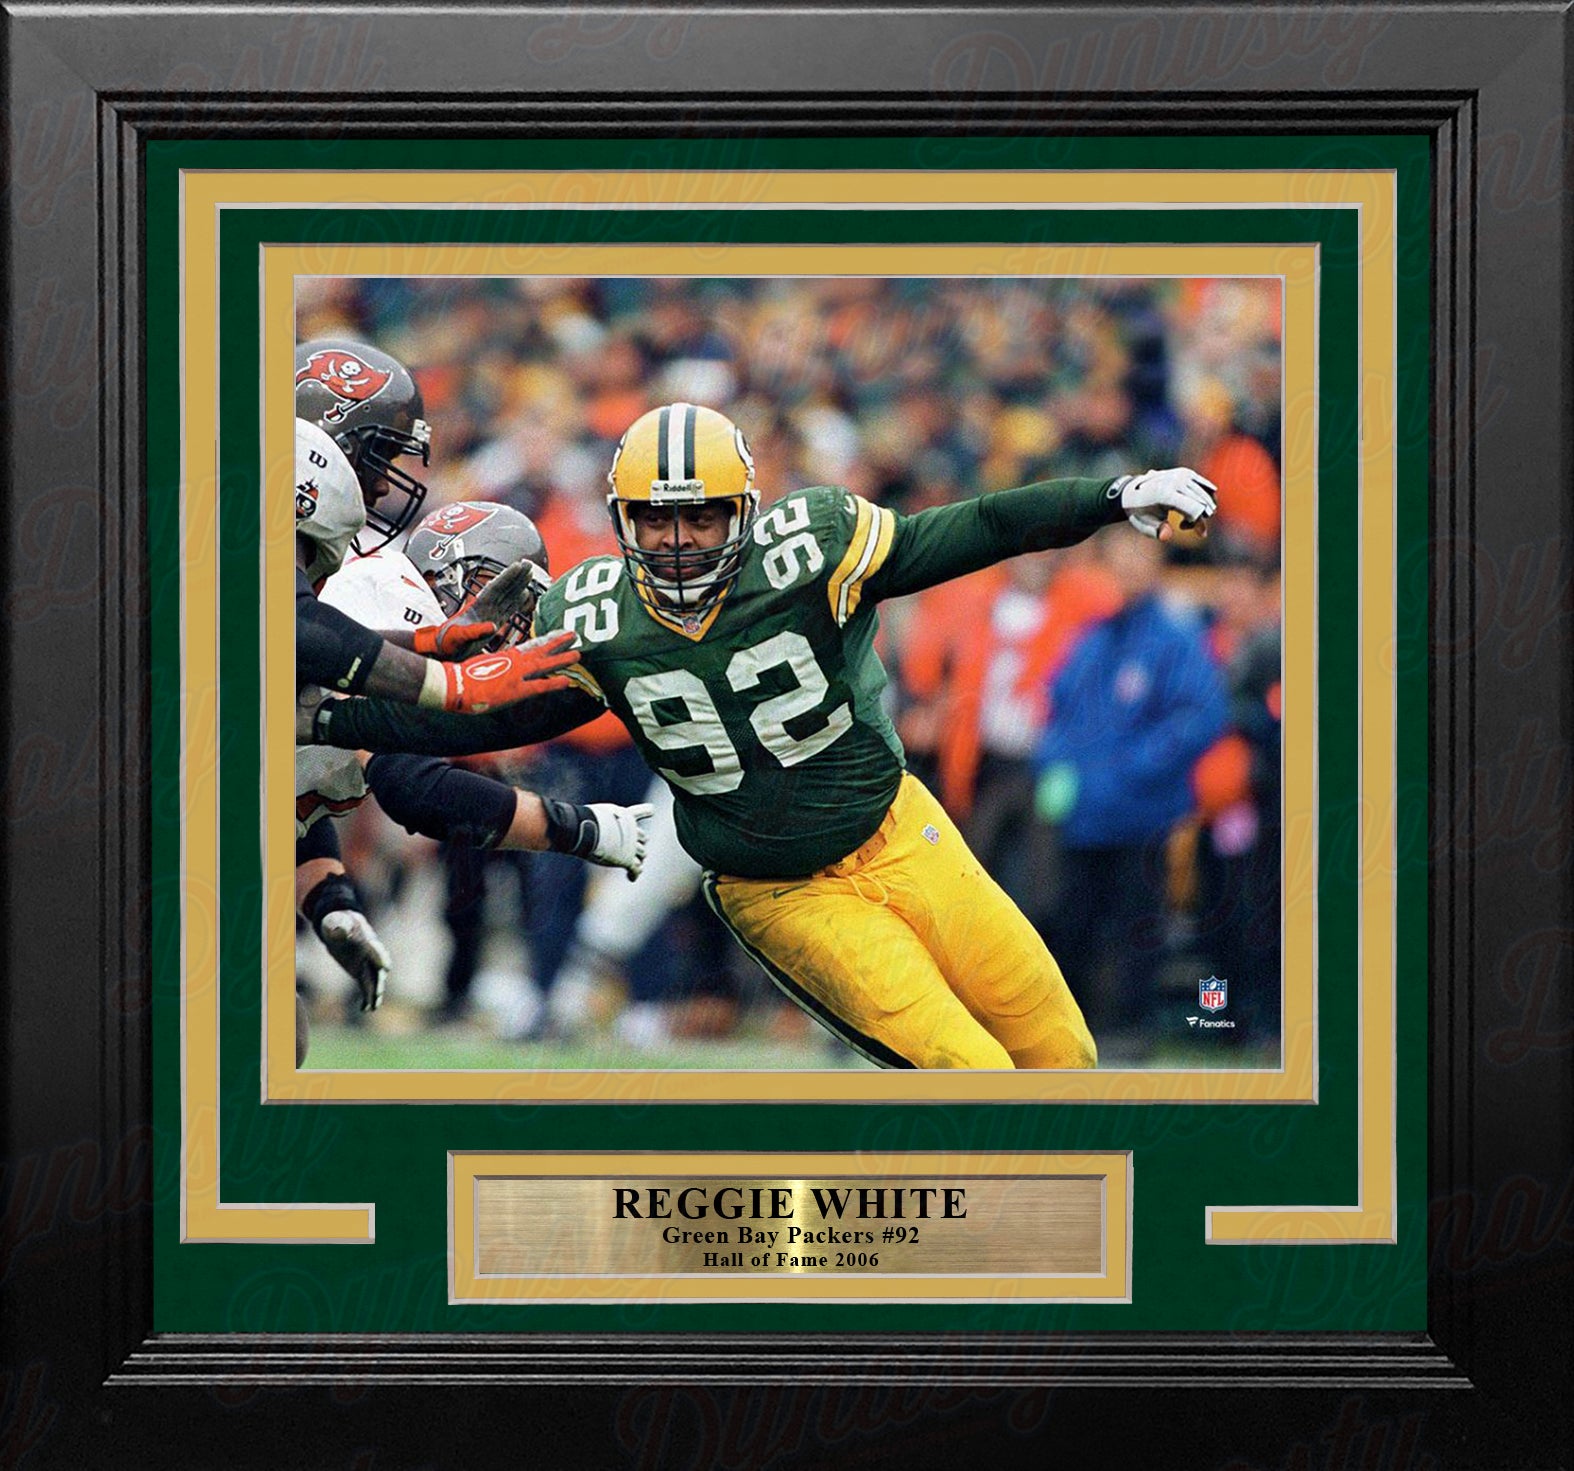 Reggie White in Action Green Bay Packers 8' x 10' Framed Football Photo